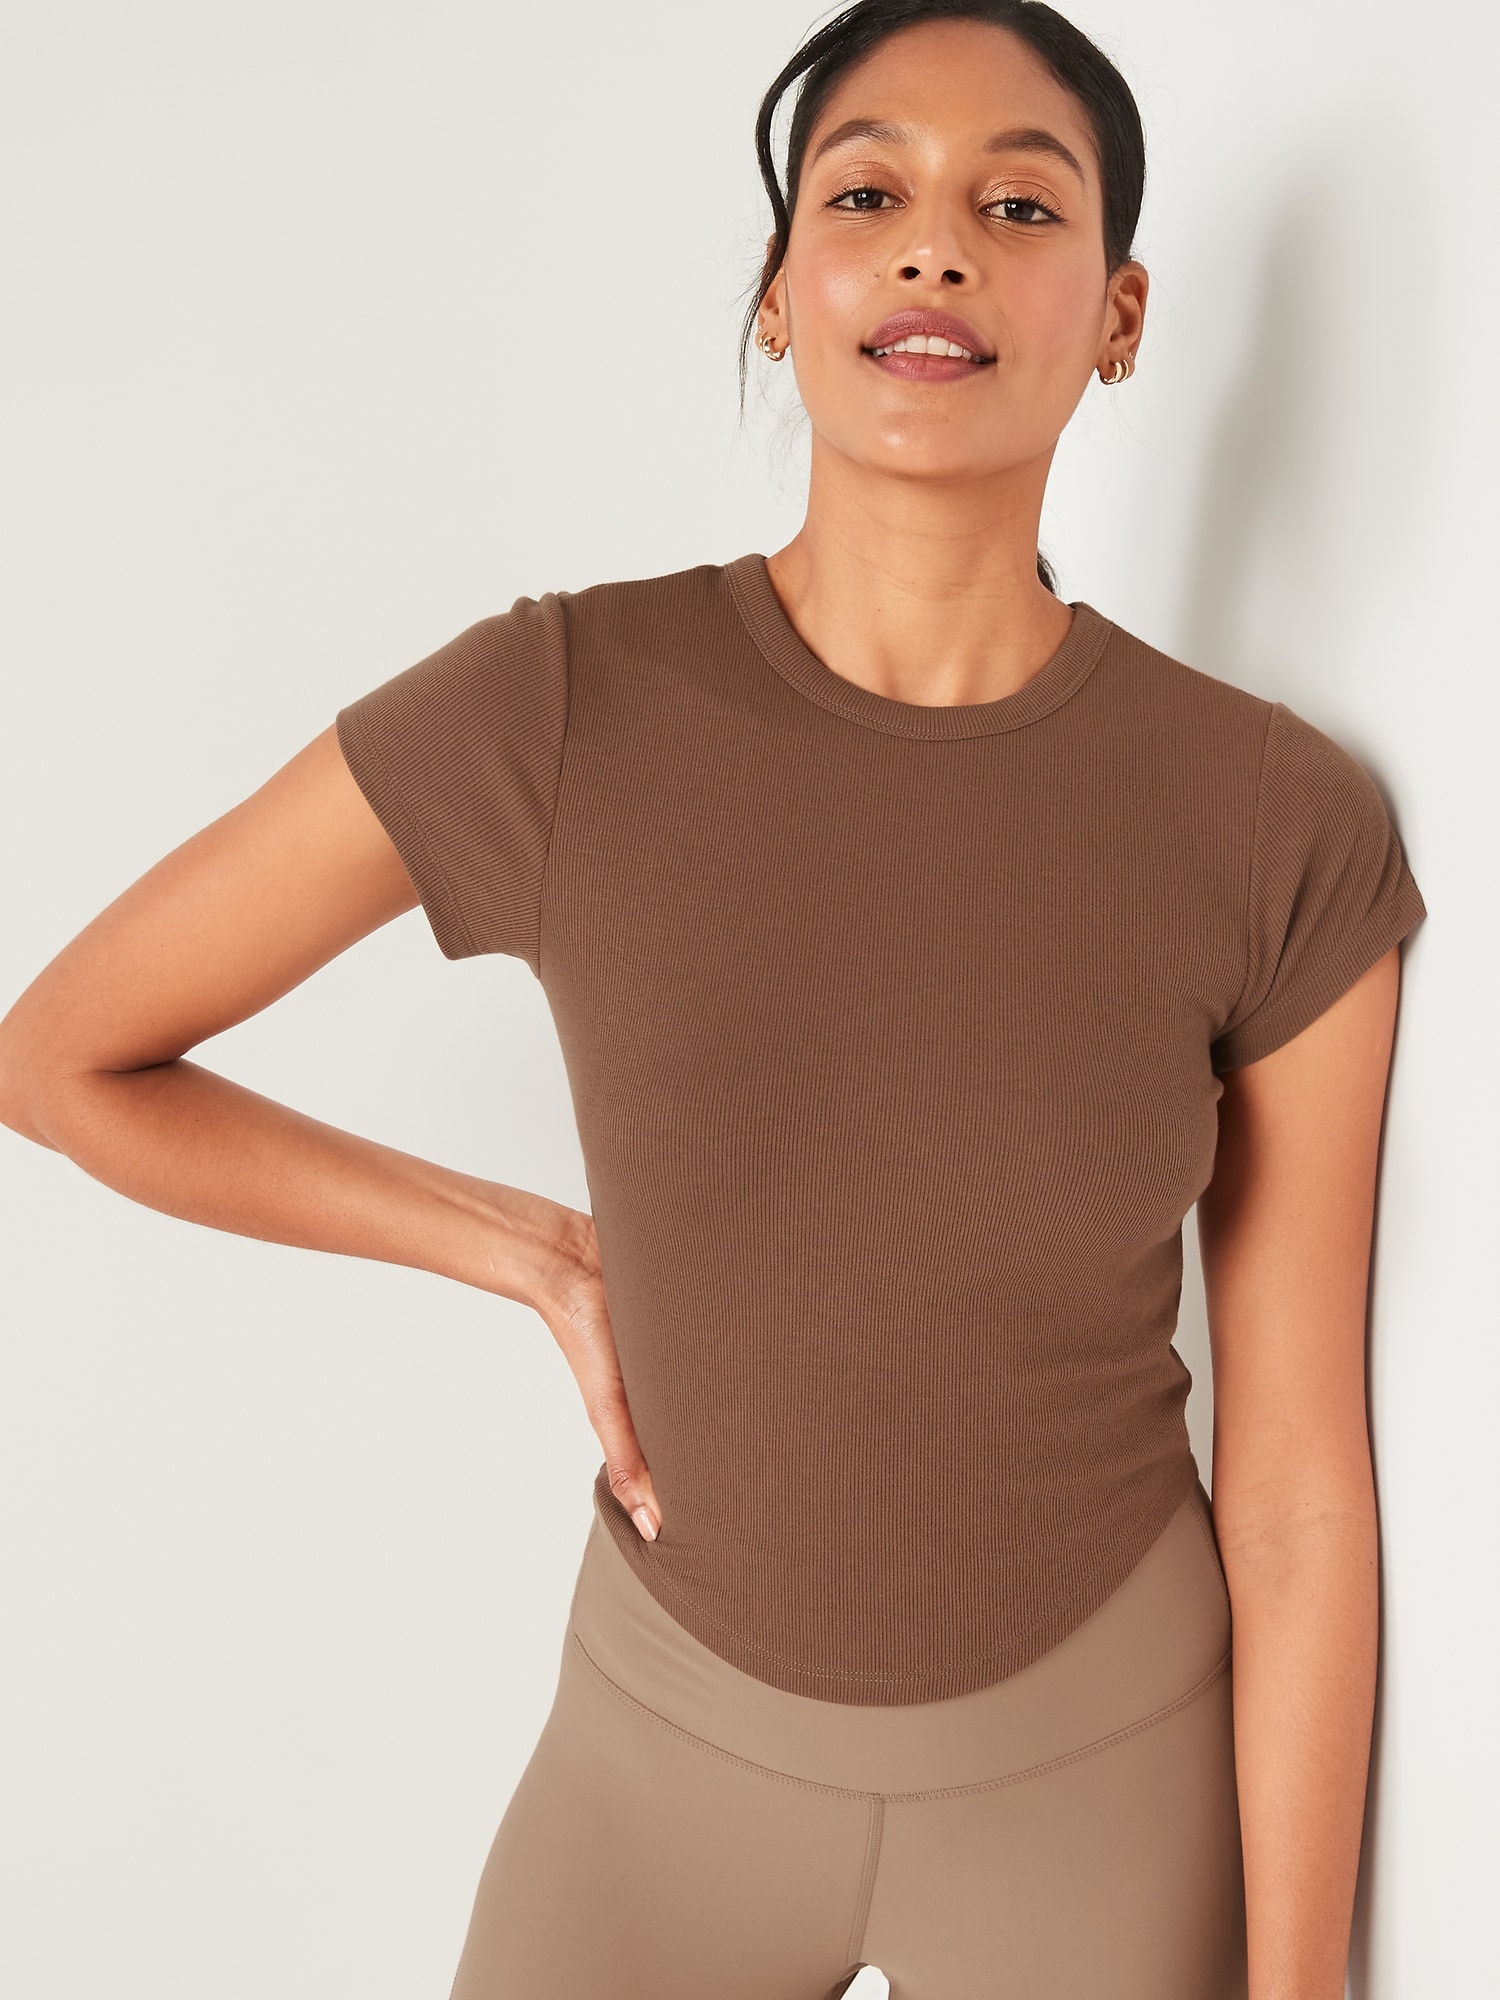 Old Navy UltraLite Cropped Rib-Knit T-Shirt for Women brown. 1